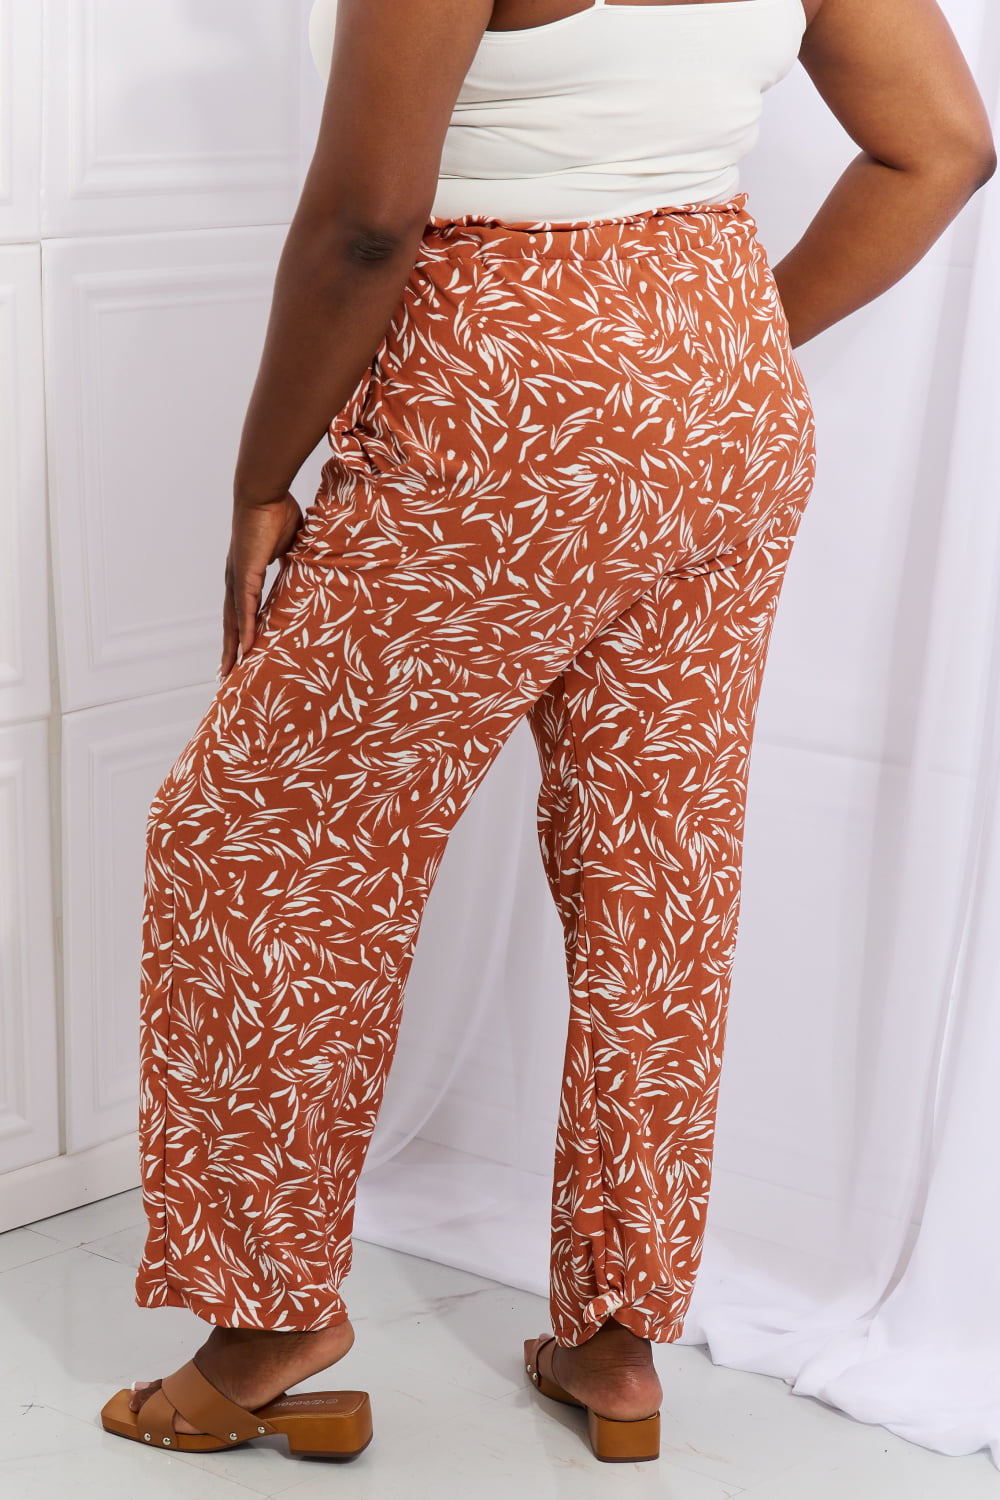 Right Angle Full Size Geometric Printed Pants in Red Orange - Bottoms - Pants - 8 - 2024